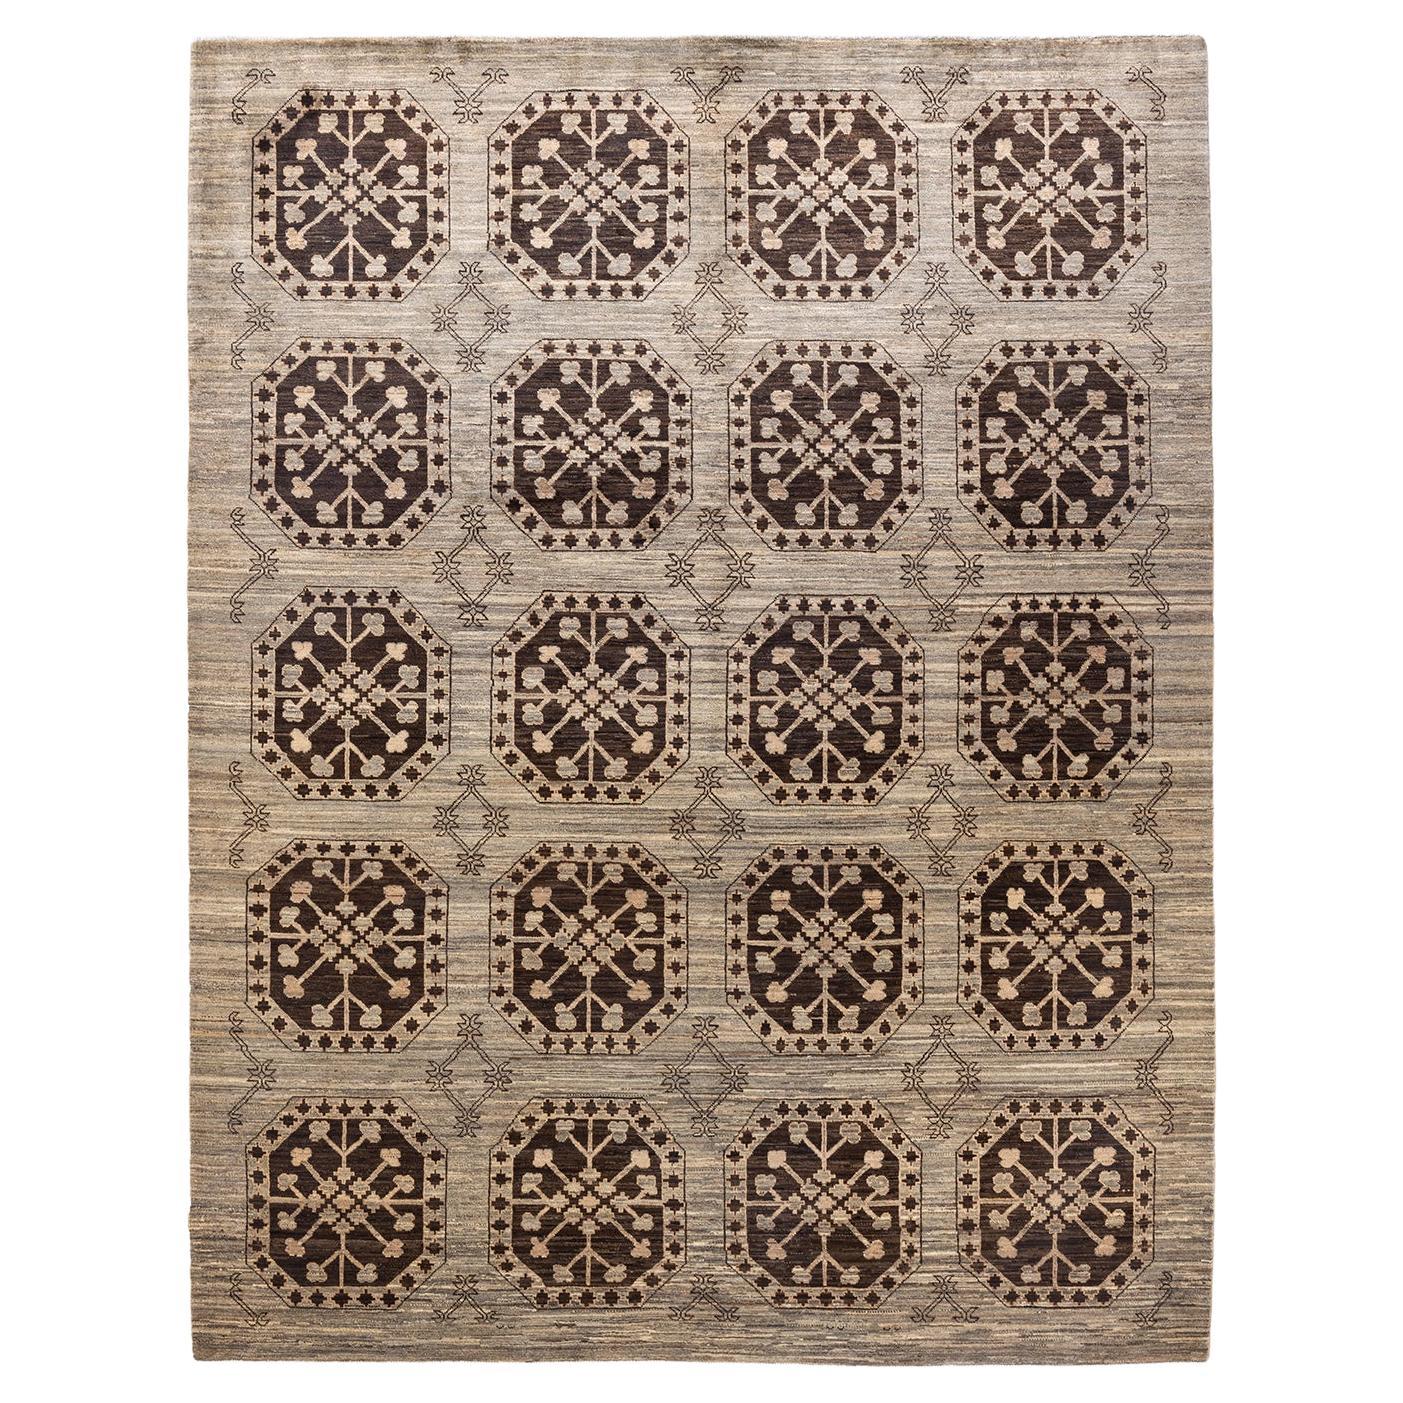 One-of-a-kind Hand Knotted Tribal Eclectic Ivory Area Rug